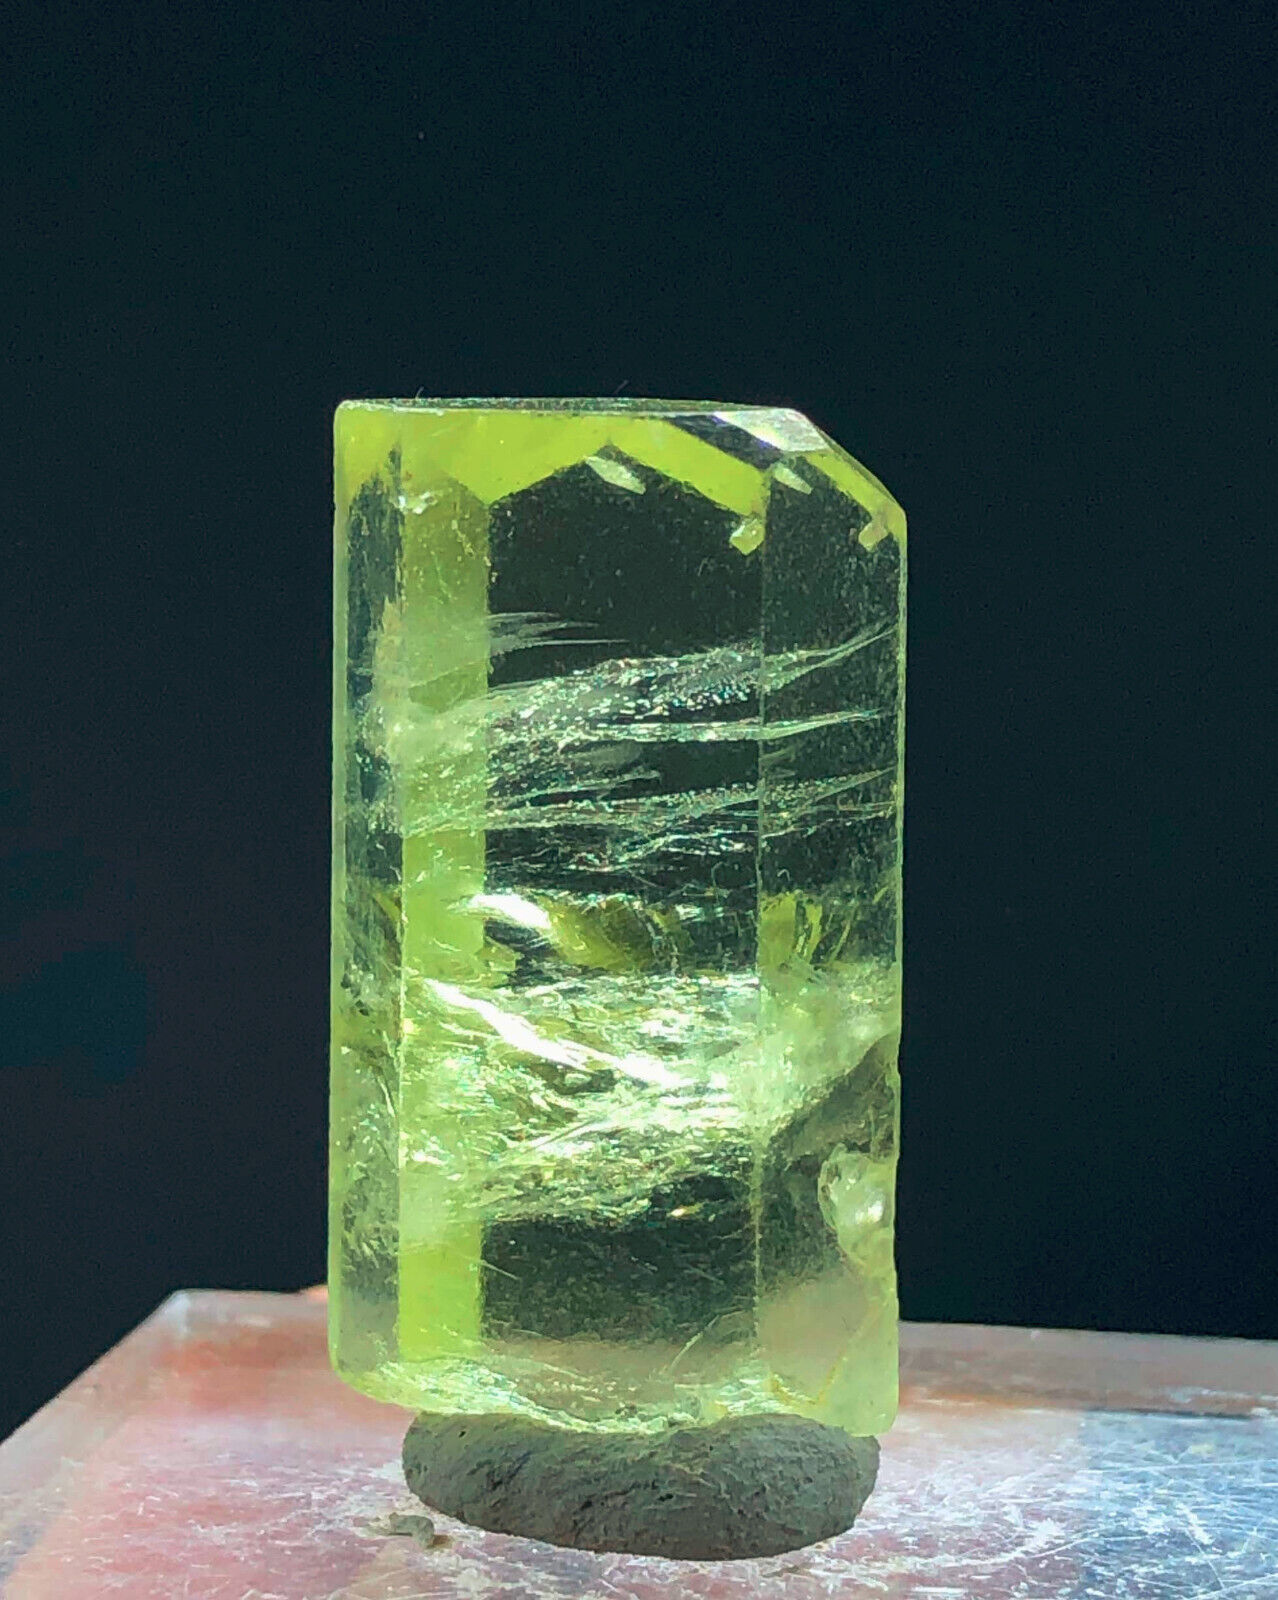 50 CTS Natural Transparent Yellow Color Heliodor Crystal From Skardu Pakistan